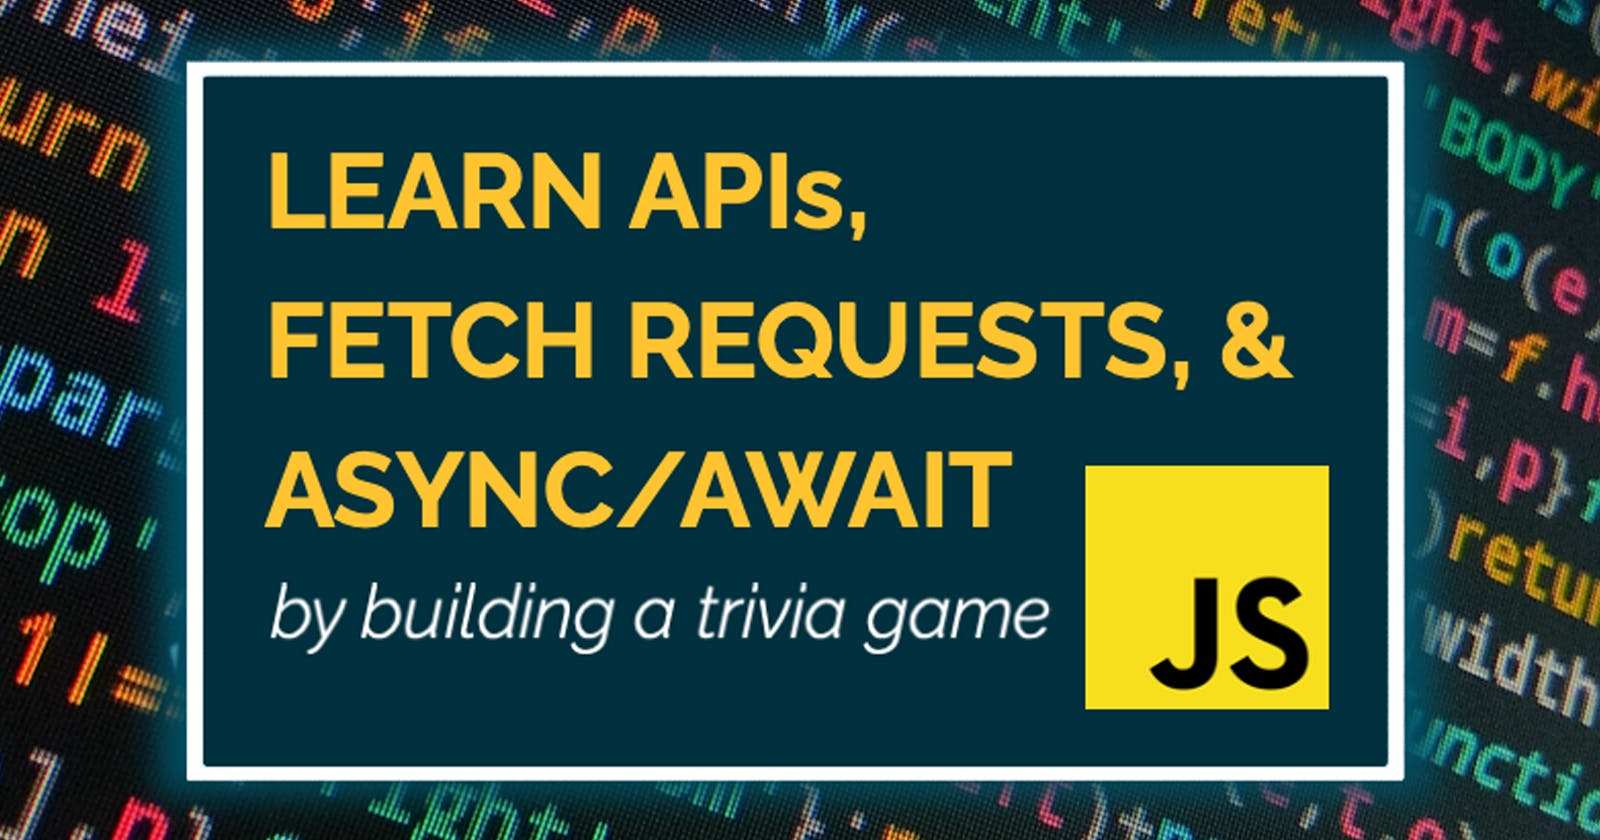 Learn JS Async/Await,  Fetch Requests & APIs by Building a Trivia Game